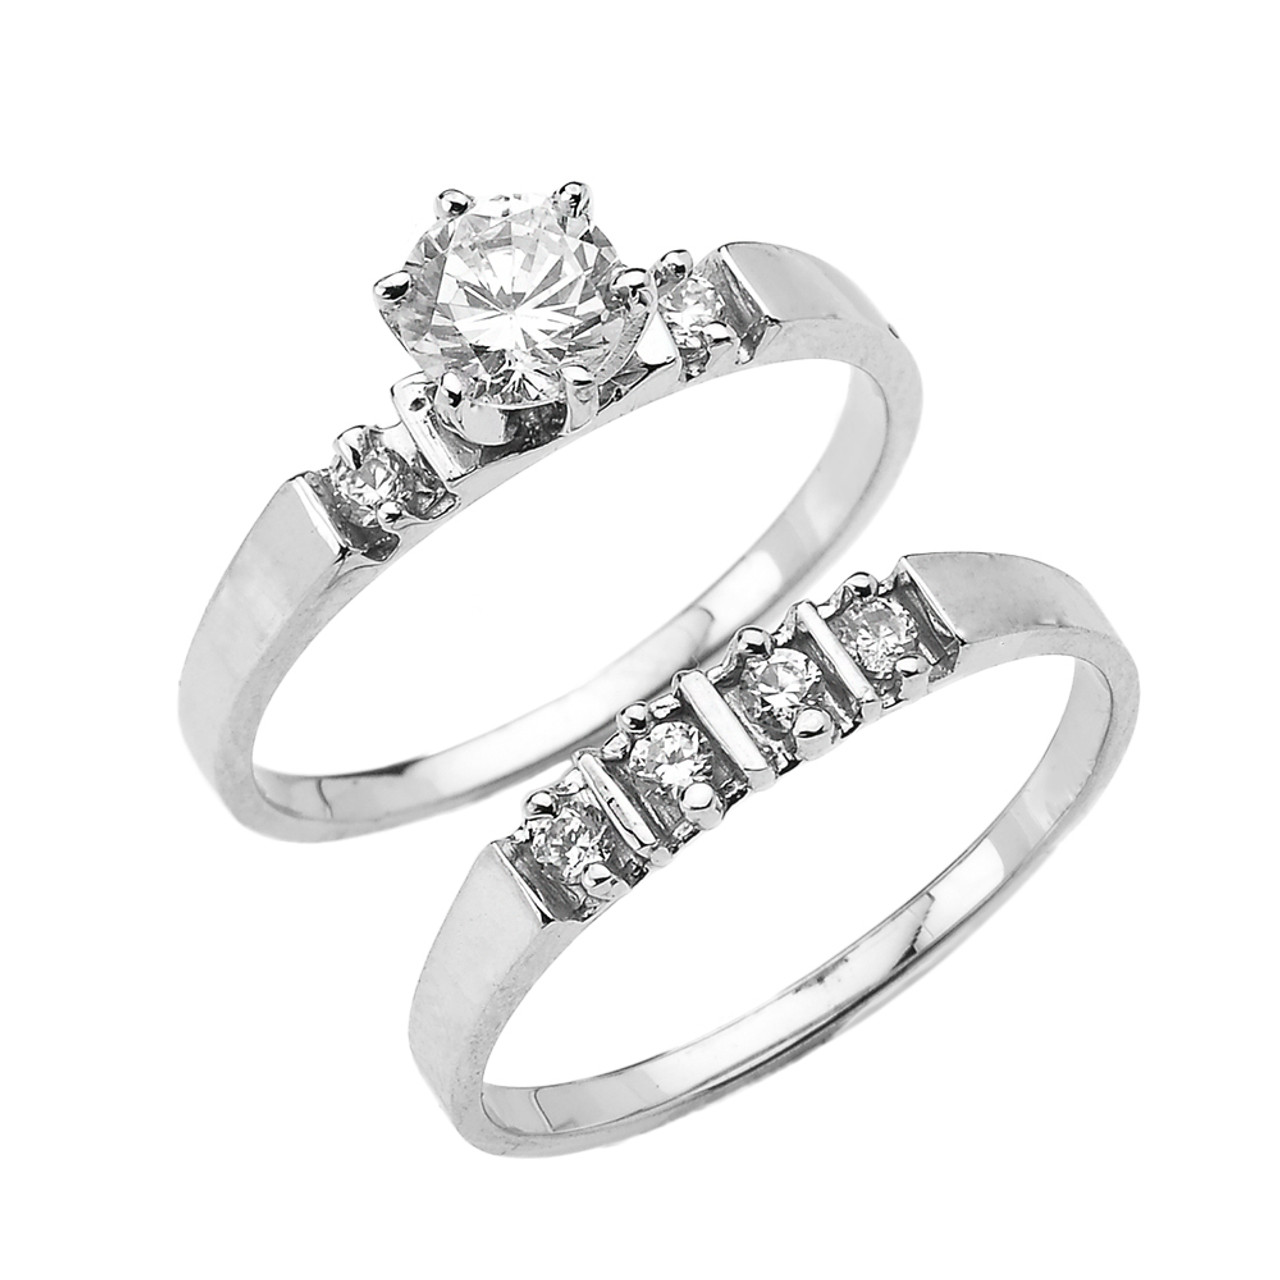 White Gold Round CZ Solitaire Engagement Wedding Ring Set